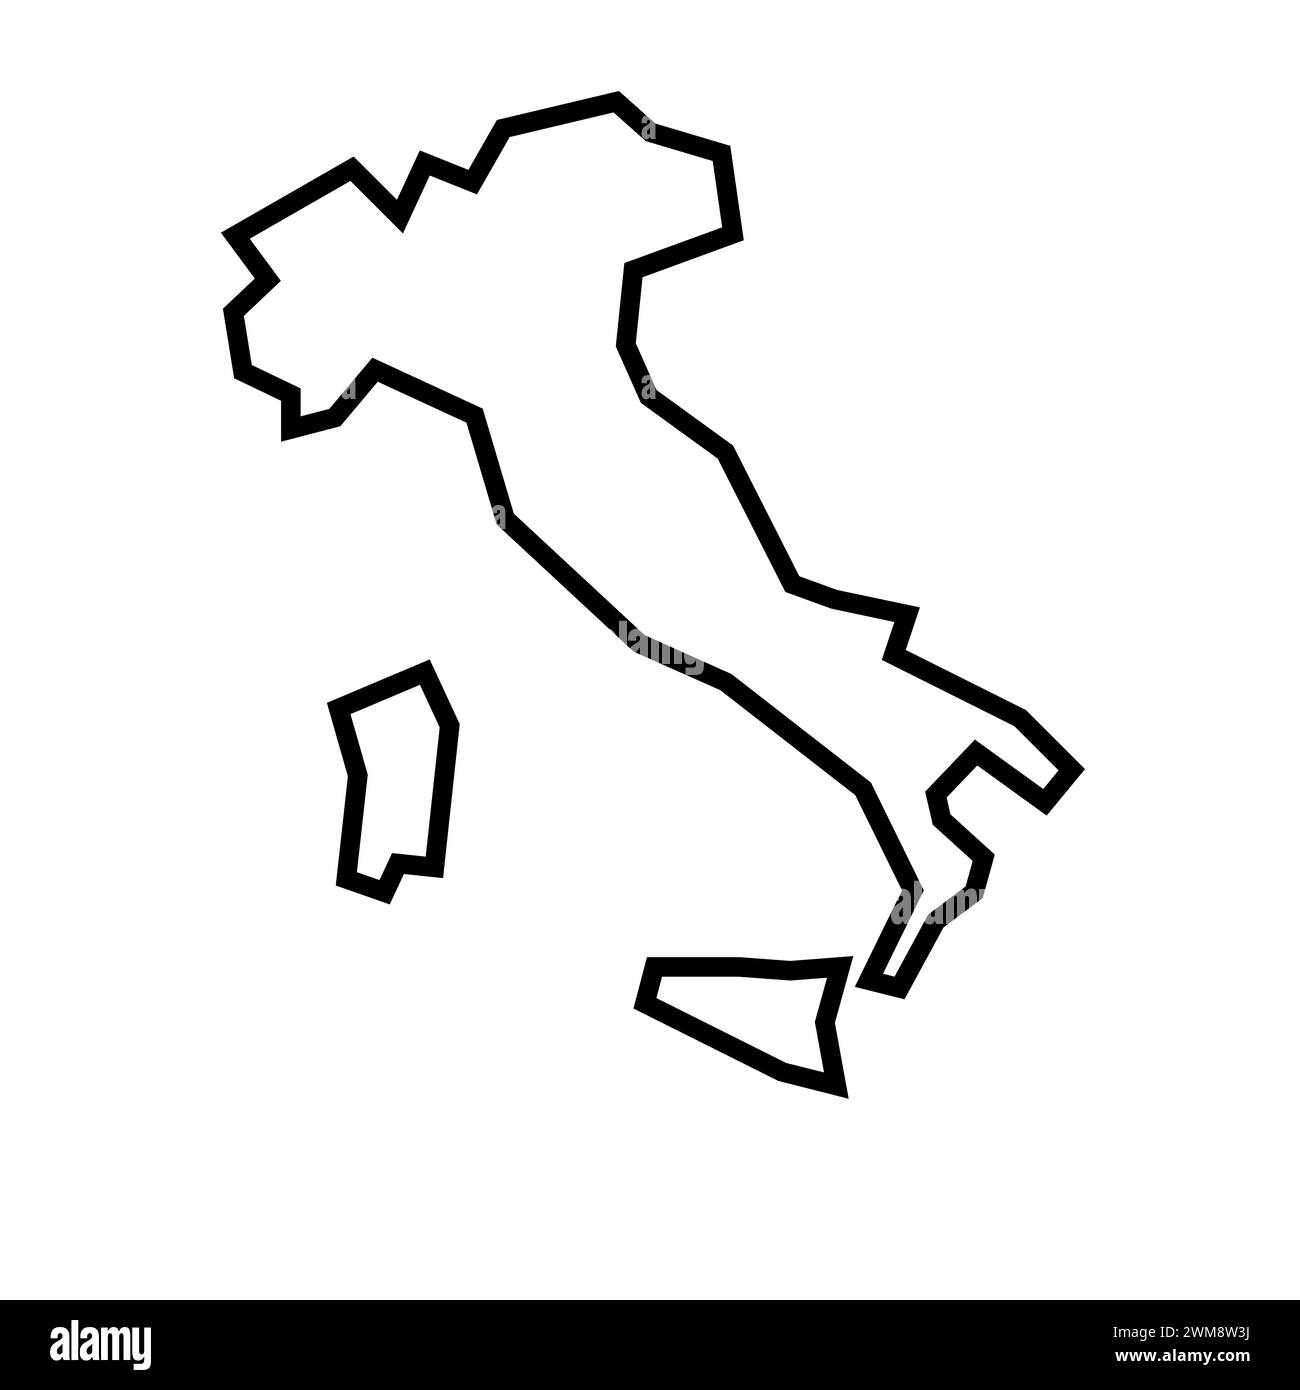 Italy country thick black outline silhouette. Simplified map. Vector icon isolated on white background. Stock Vector